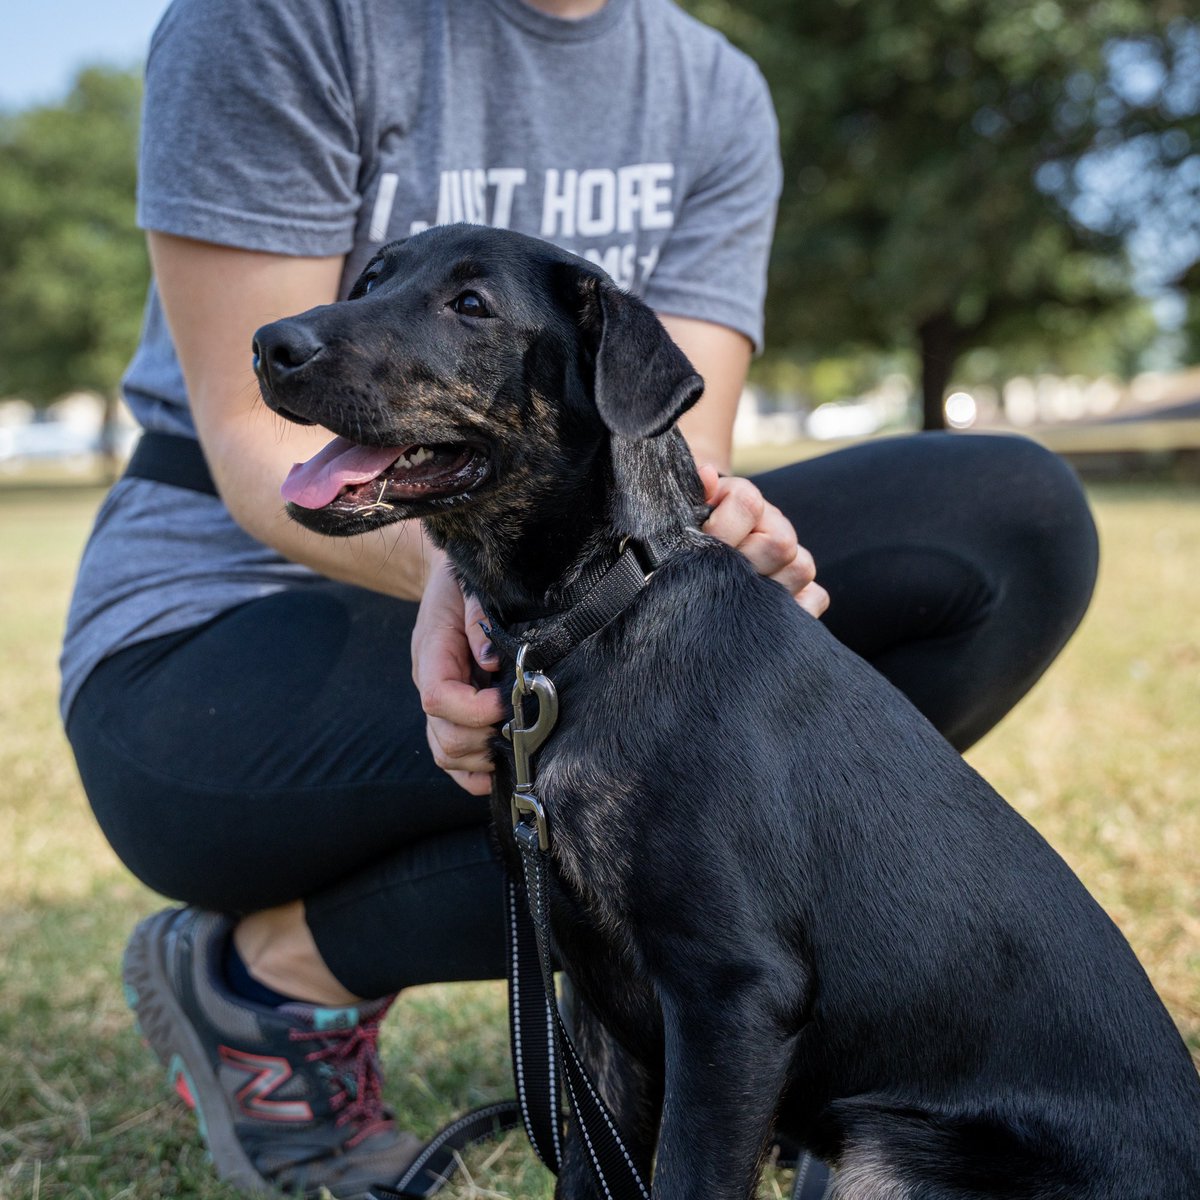 Remember Greenie? She arrived at @austinhumane with a broken jaw and needed a tape muzzle to heal properly. Well, she’s finally healed, the tape has come off, and she’s ready to be adopted ❤️‍🩹